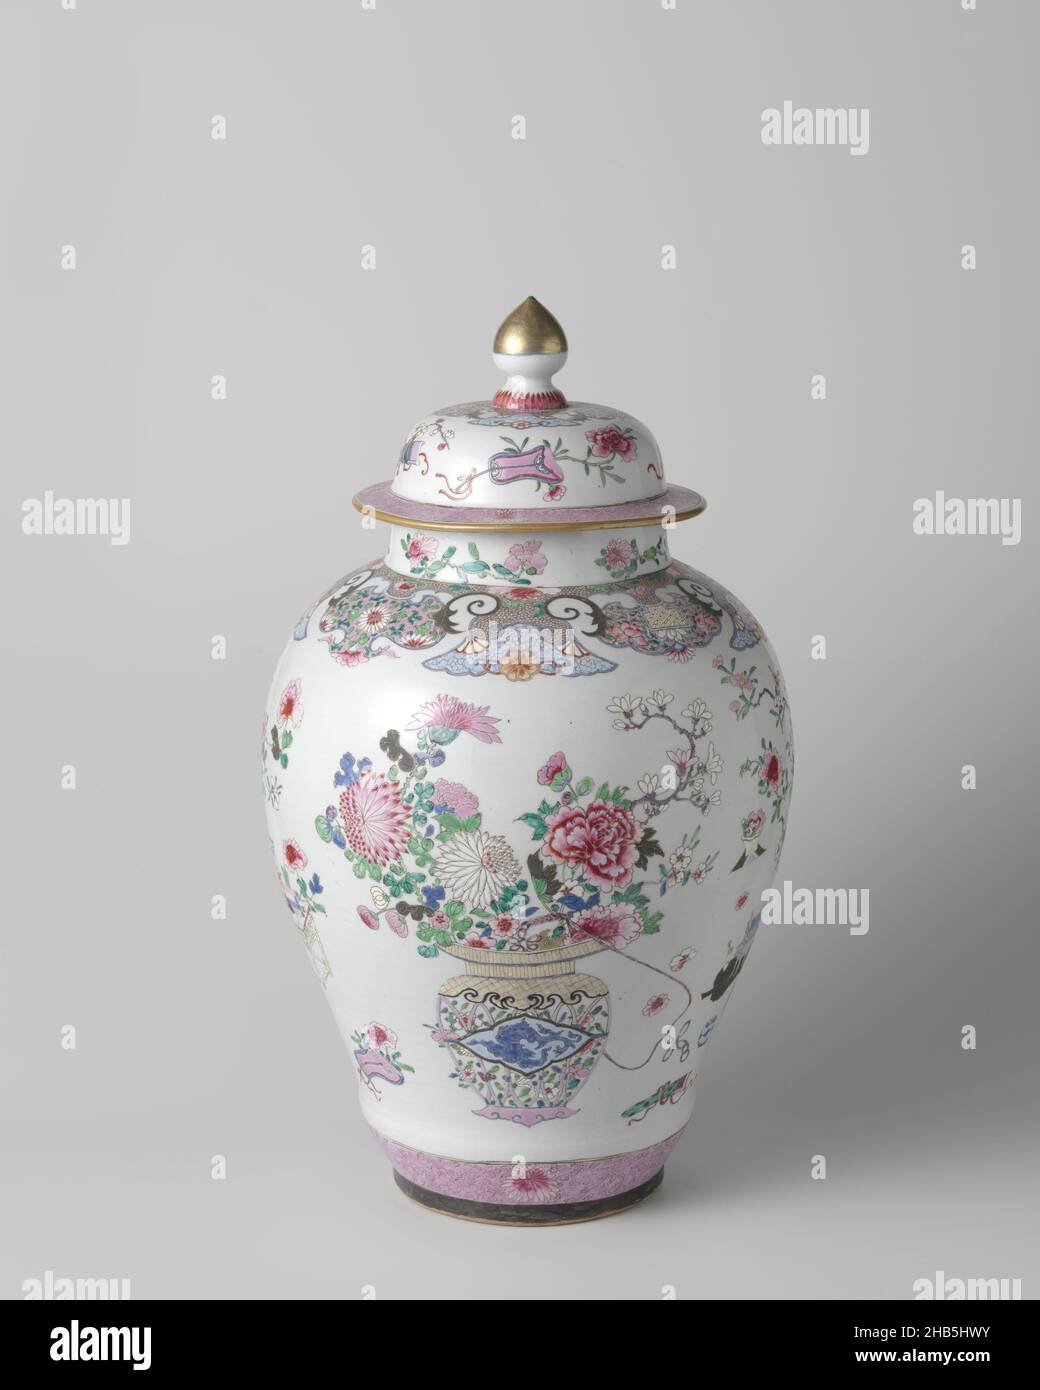 Ovoid covered jar with flower baskets and auspicious symbols, Ovoid covered jar of porcelain, painted in underglaze blue and on the glaze in blue, red, pink, green, black and gold. On the wall twice an openwork handle basket with a chilong (hornless dragon) in a scalloped cartouche. The basket is filled with flower and fruit branches (peony, chrysanthemum, prunus, finger lemon, magnolia). In between also twice a flower vase on a low table. On the vase the head of a shishi (lion dog) with a ring in its mouth. The vase is surrounded by lucky objects (table with scrolls, ruyi scepter, fan, qin Stock Photo